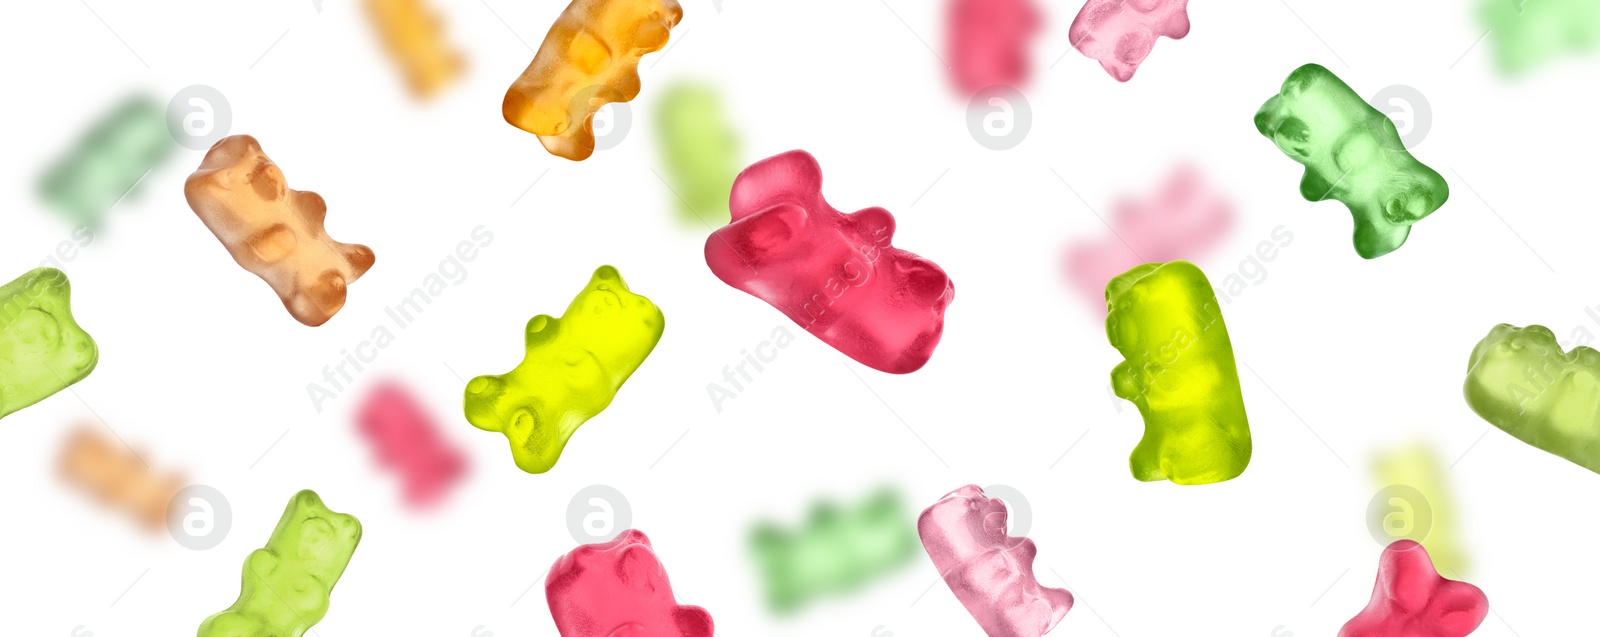 Image of Set of delicious jelly bears falling on white background, banner design 